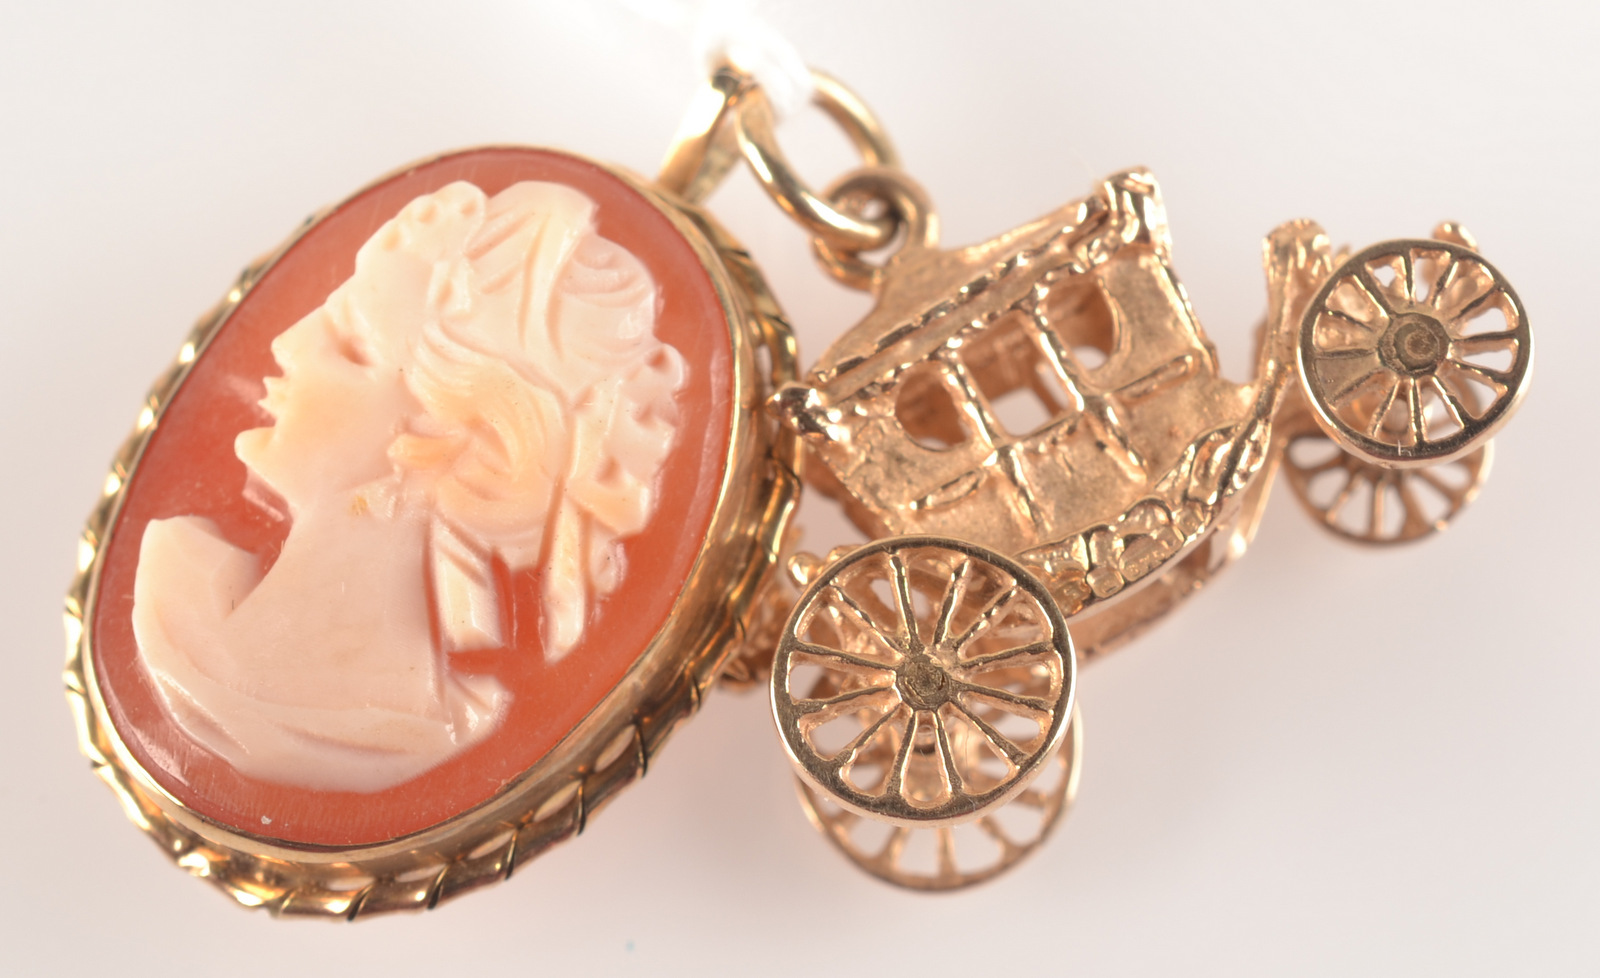 A gold carriage charm and a gold mounted cameo pendant/brooch.